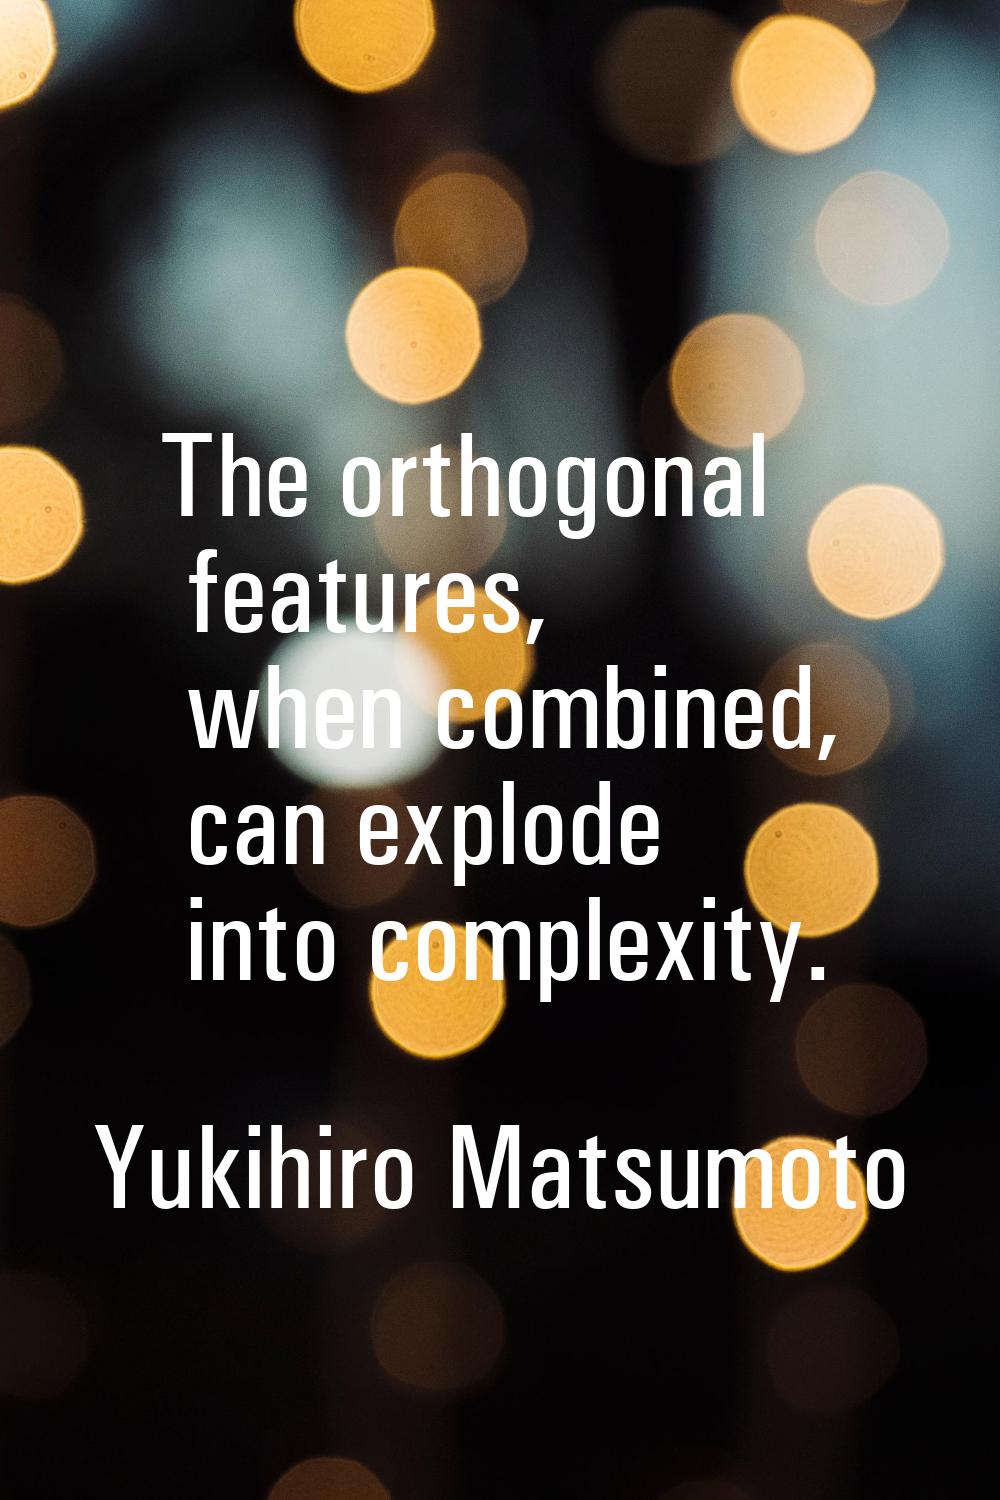 The orthogonal features, when combined, can explode into complexity.